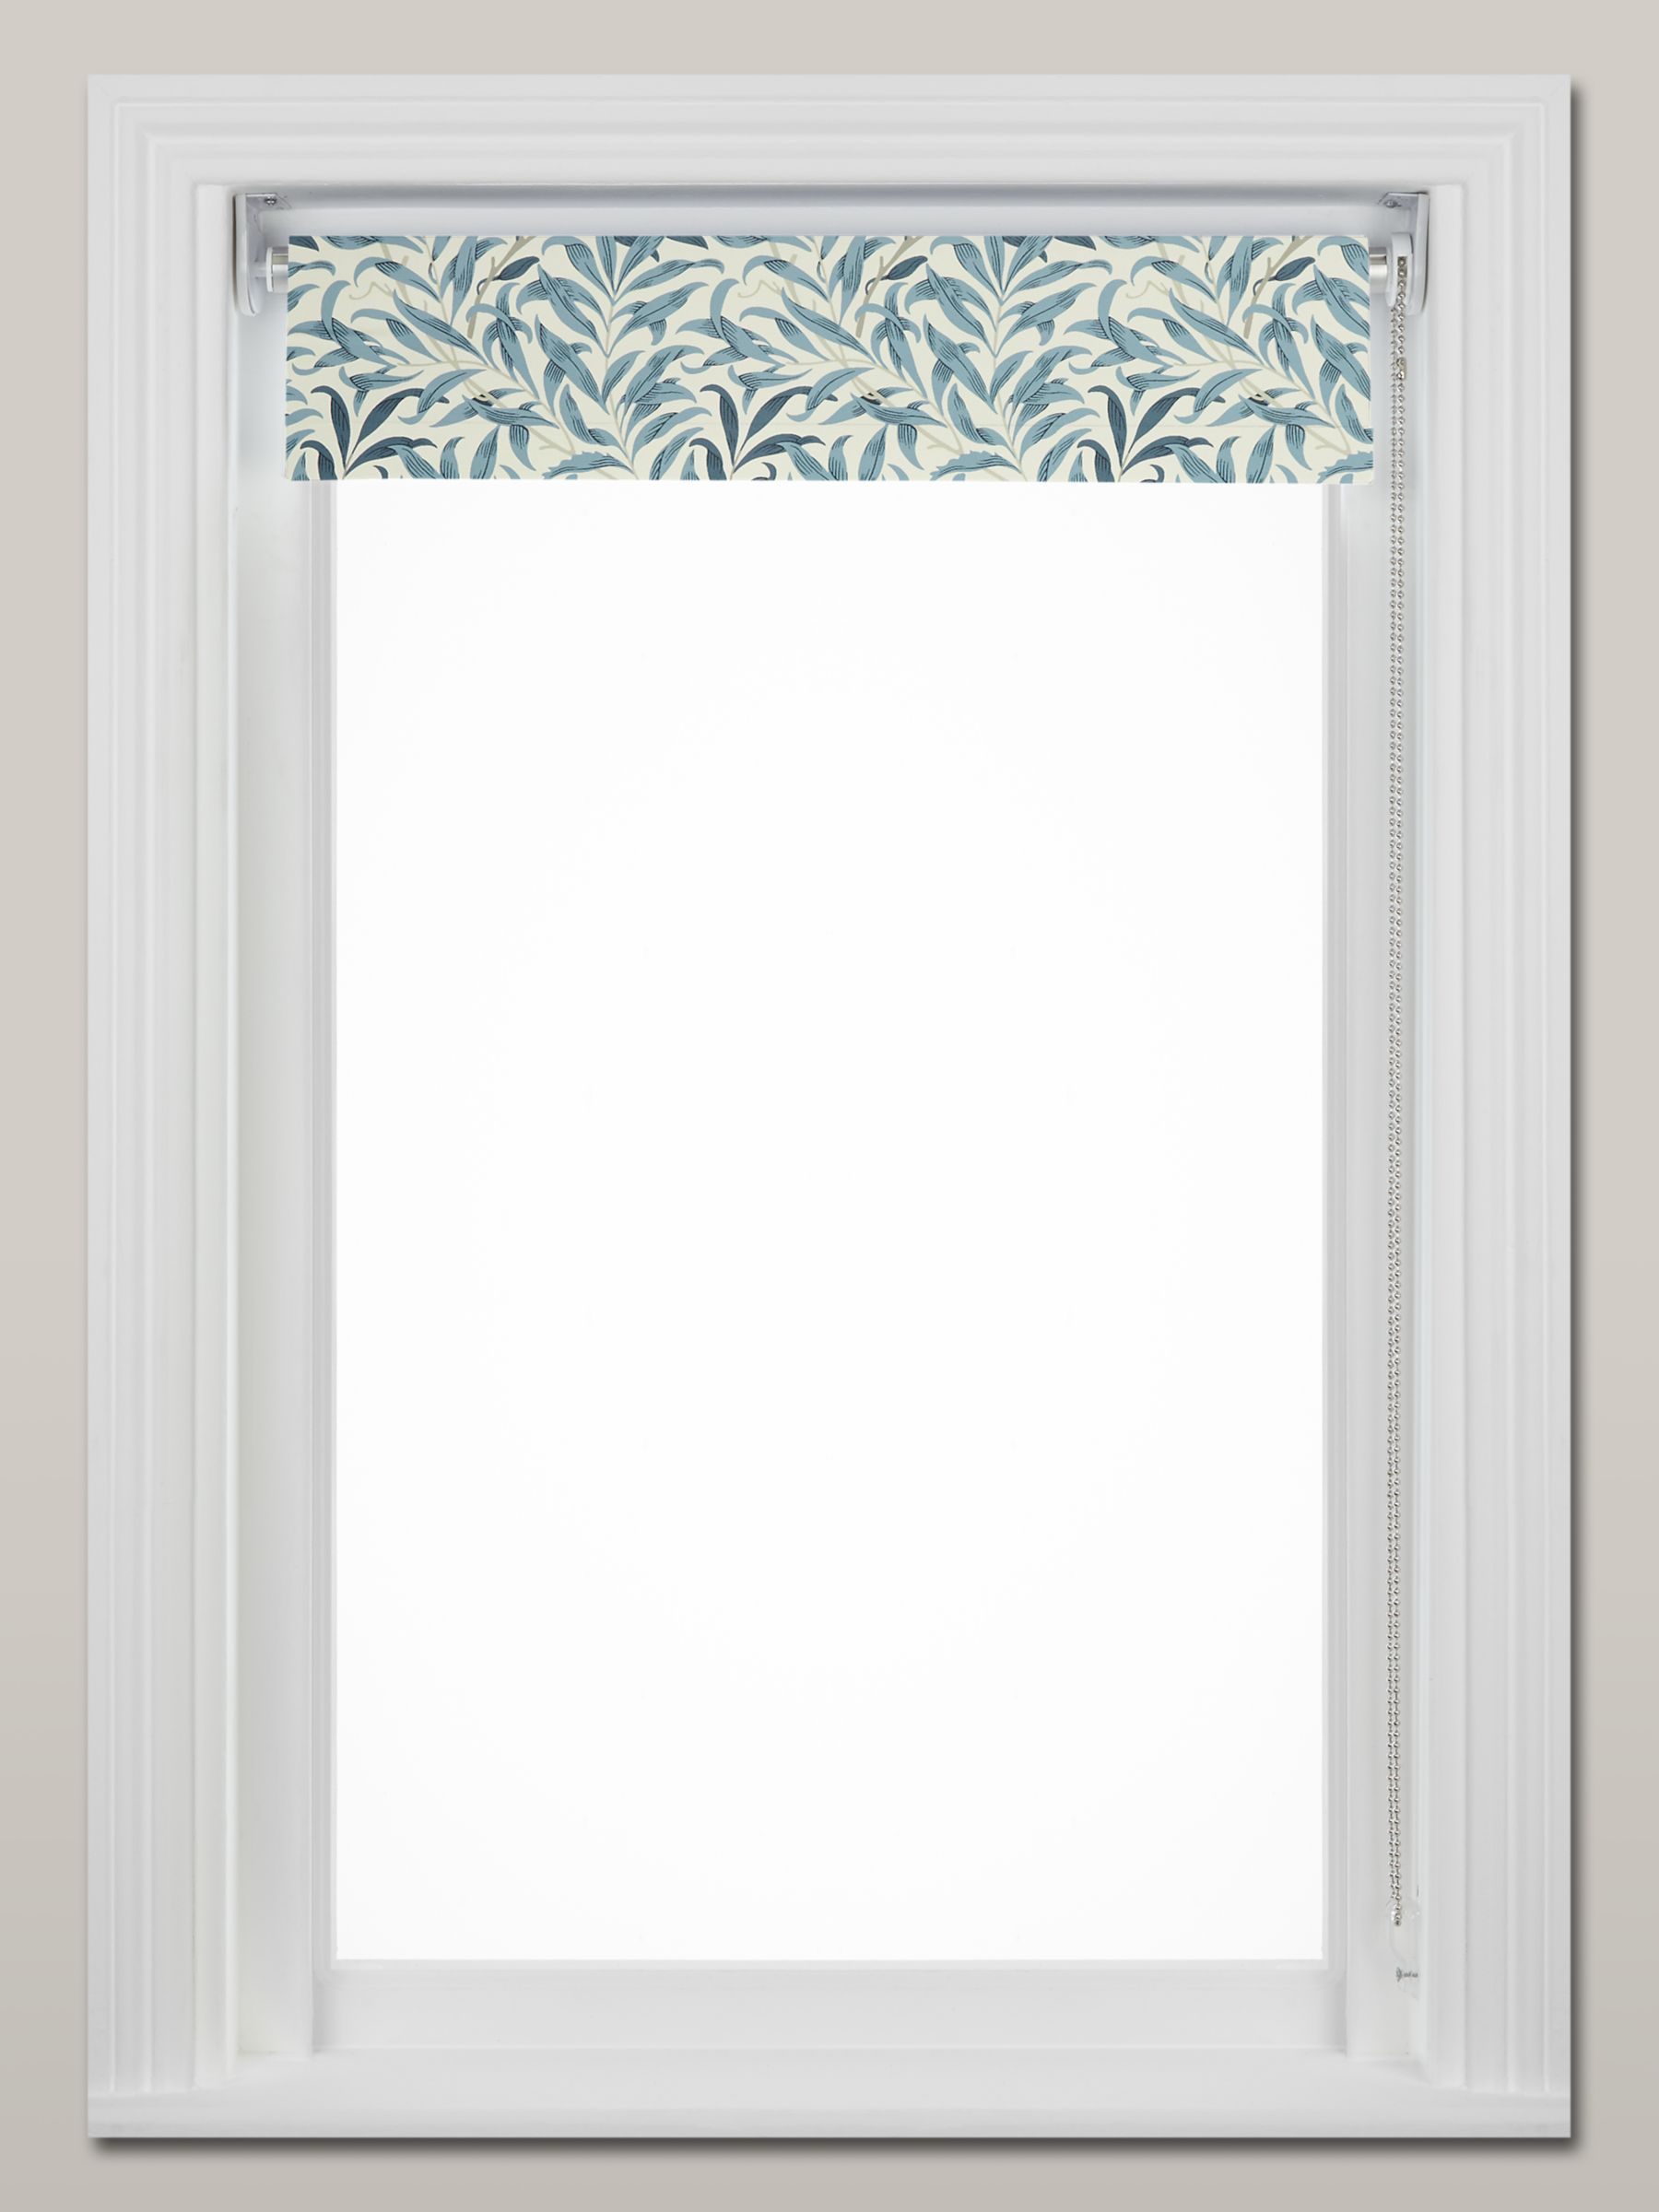 Morris & Co. Willow Boughs Made to Measure Blackout Roller Blind, China Blue